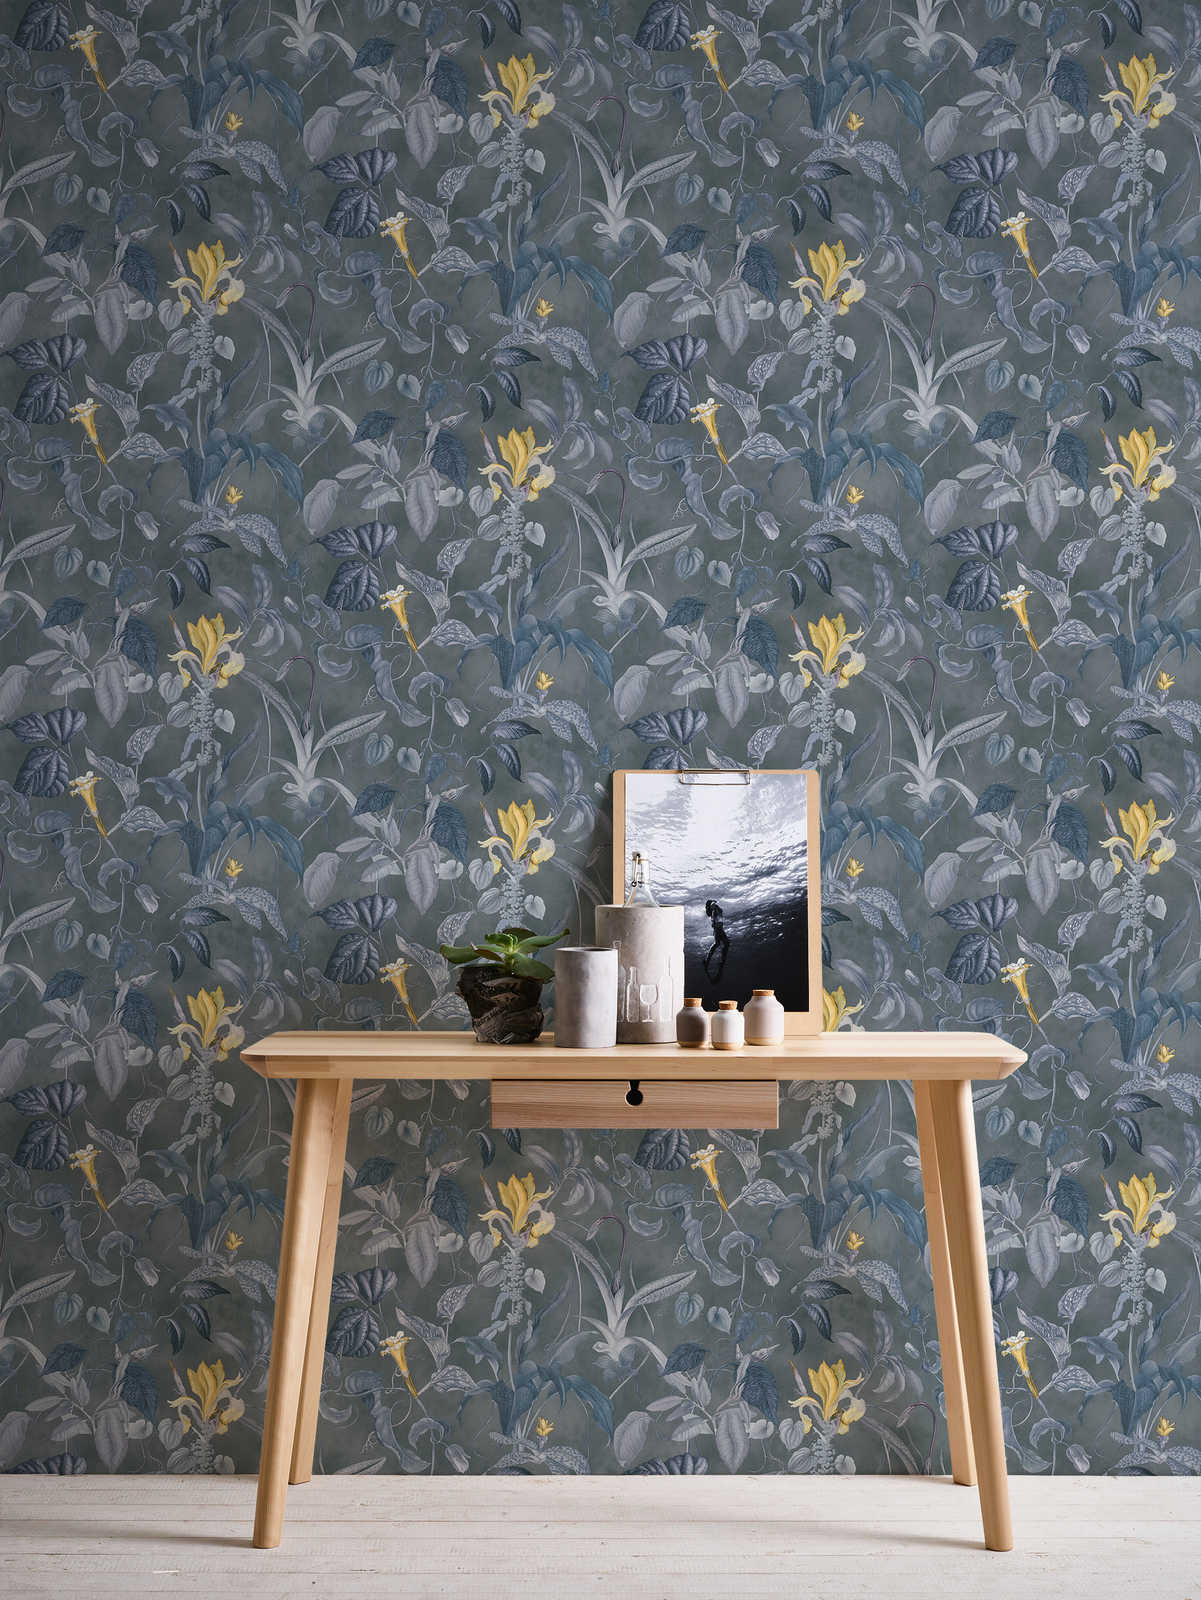             Tropical floral wallpaper grey-blue, Design by MICHALSKY
        